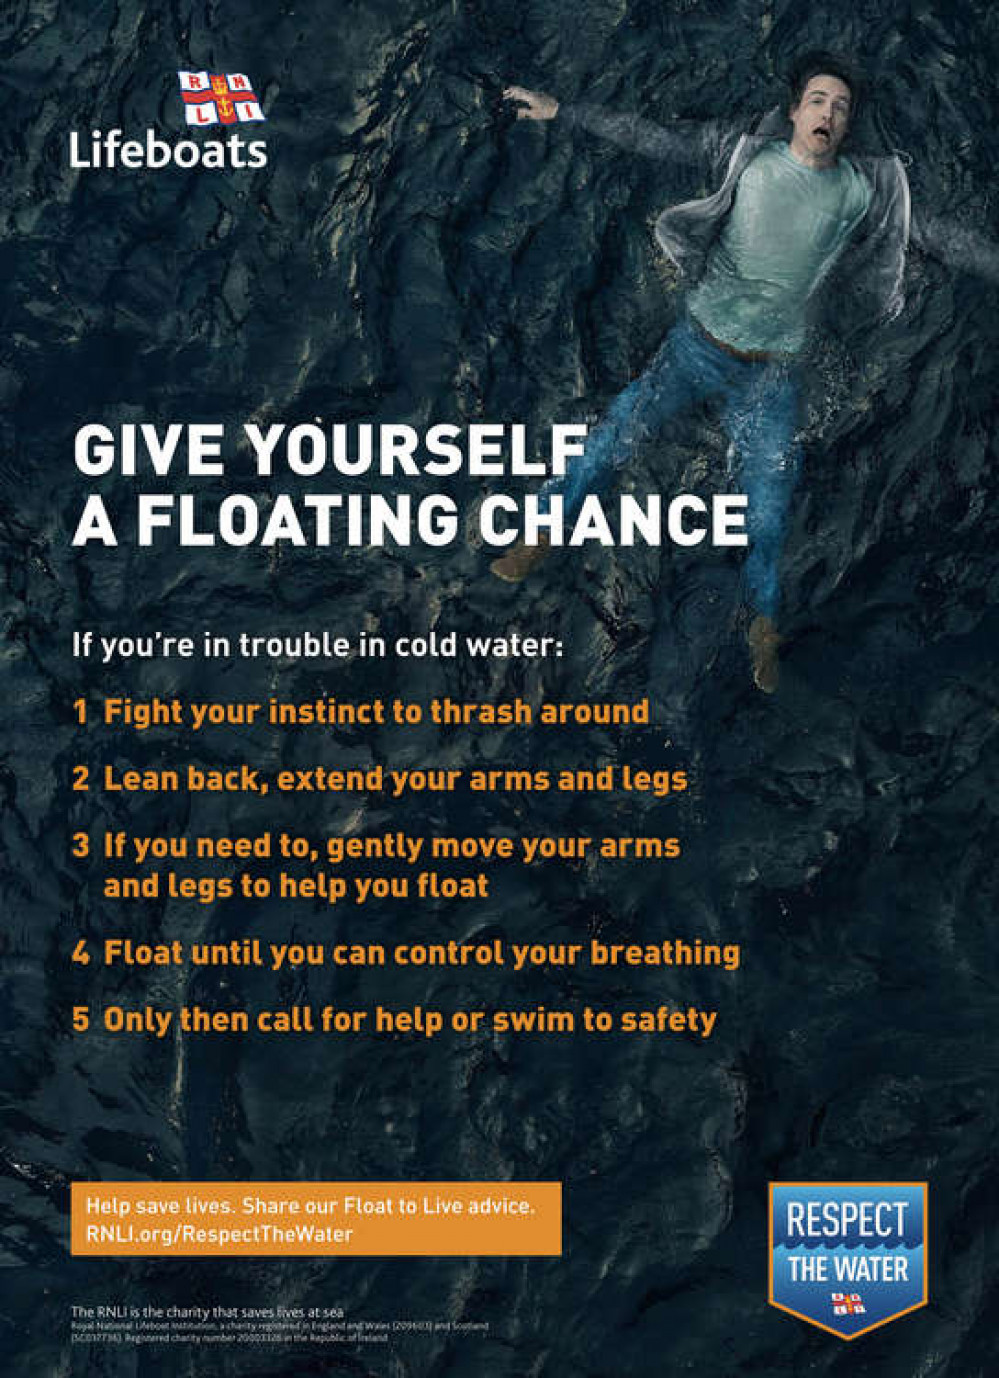 RNLI 'Give Yourself a Floating Chance' banner. Credit : RNLI